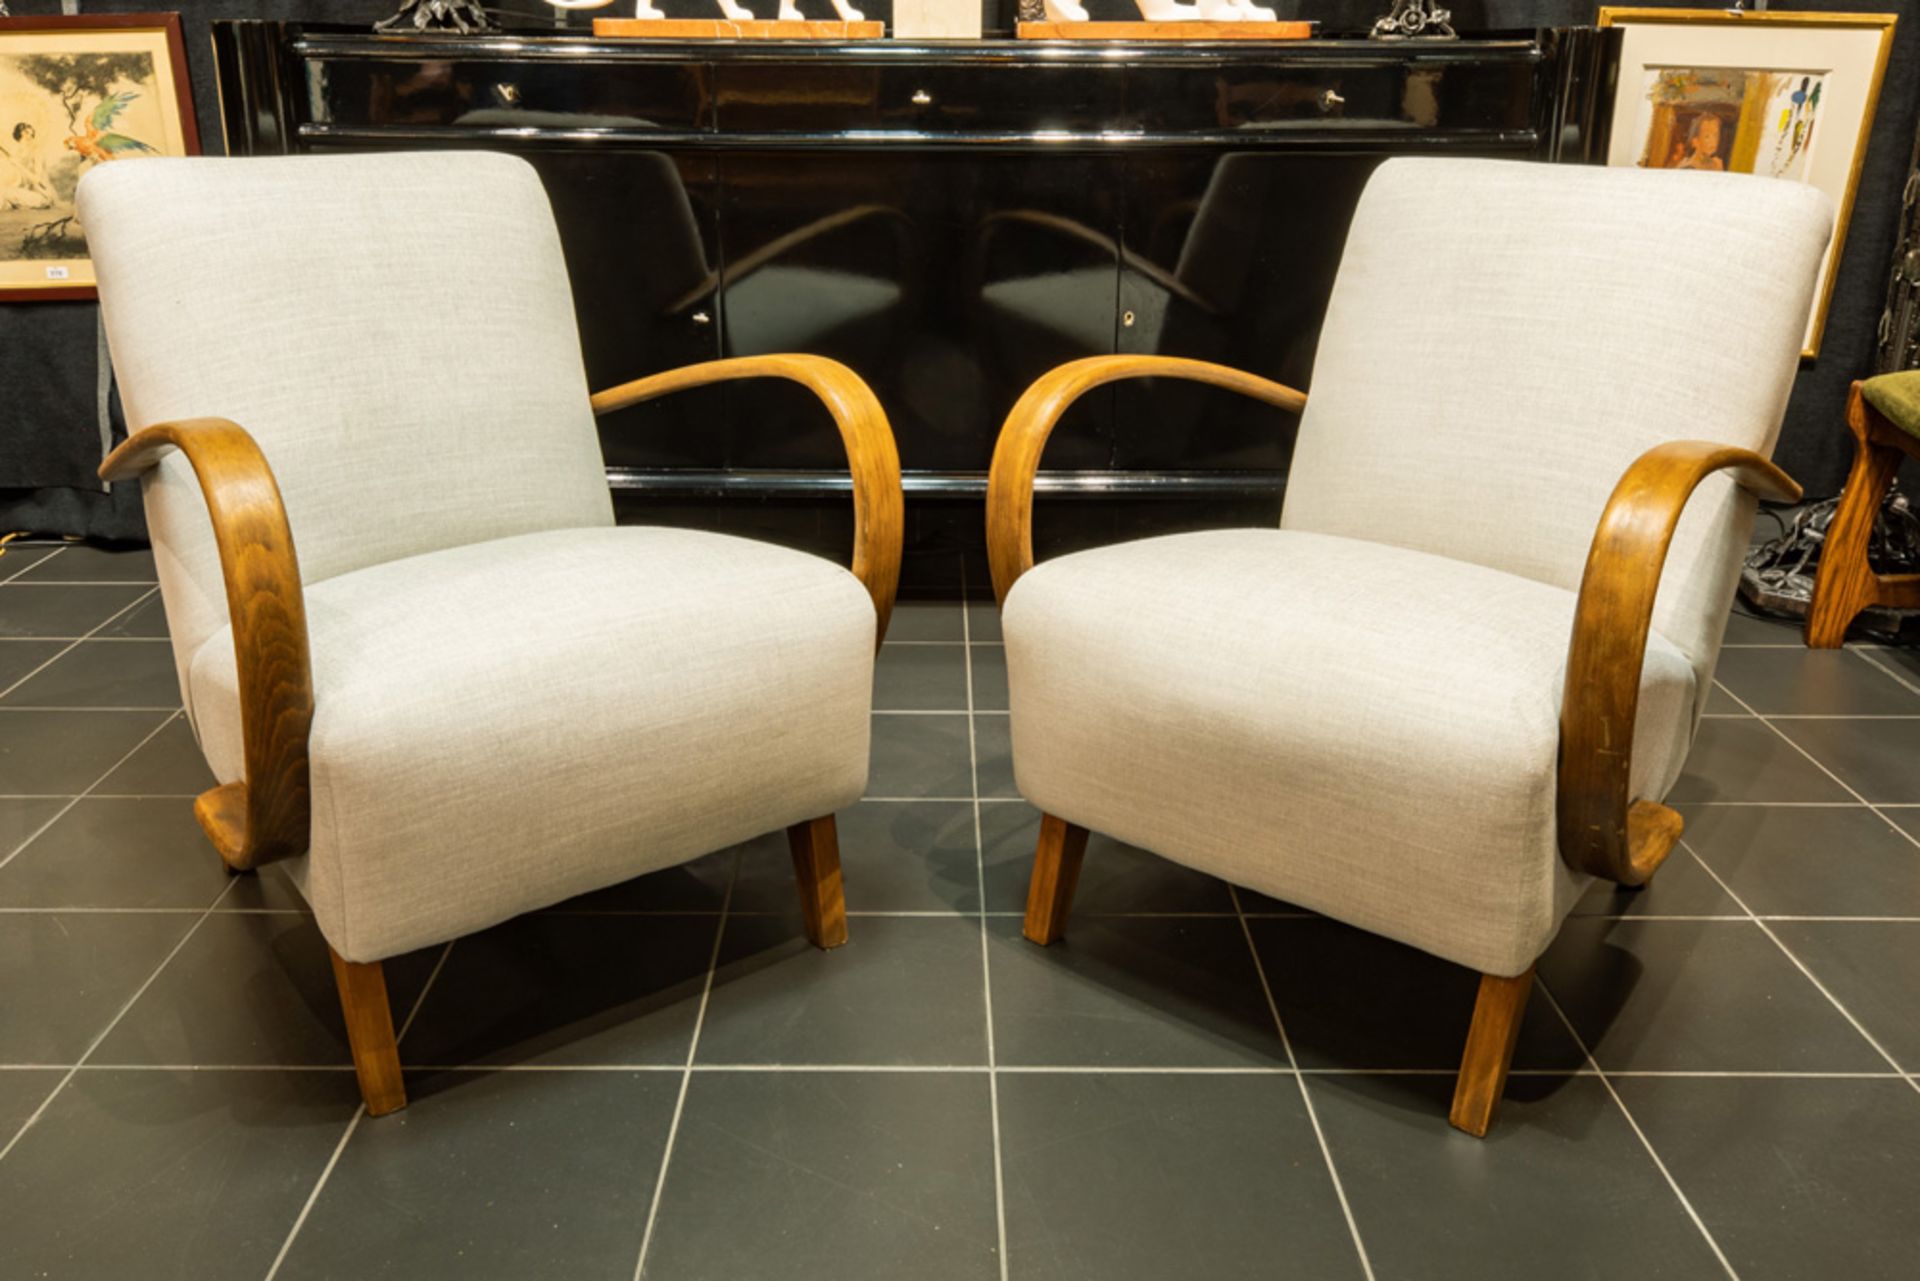 pair of Czech design arm chairs in wood and white textile by Jindrich Halabala - to be dated